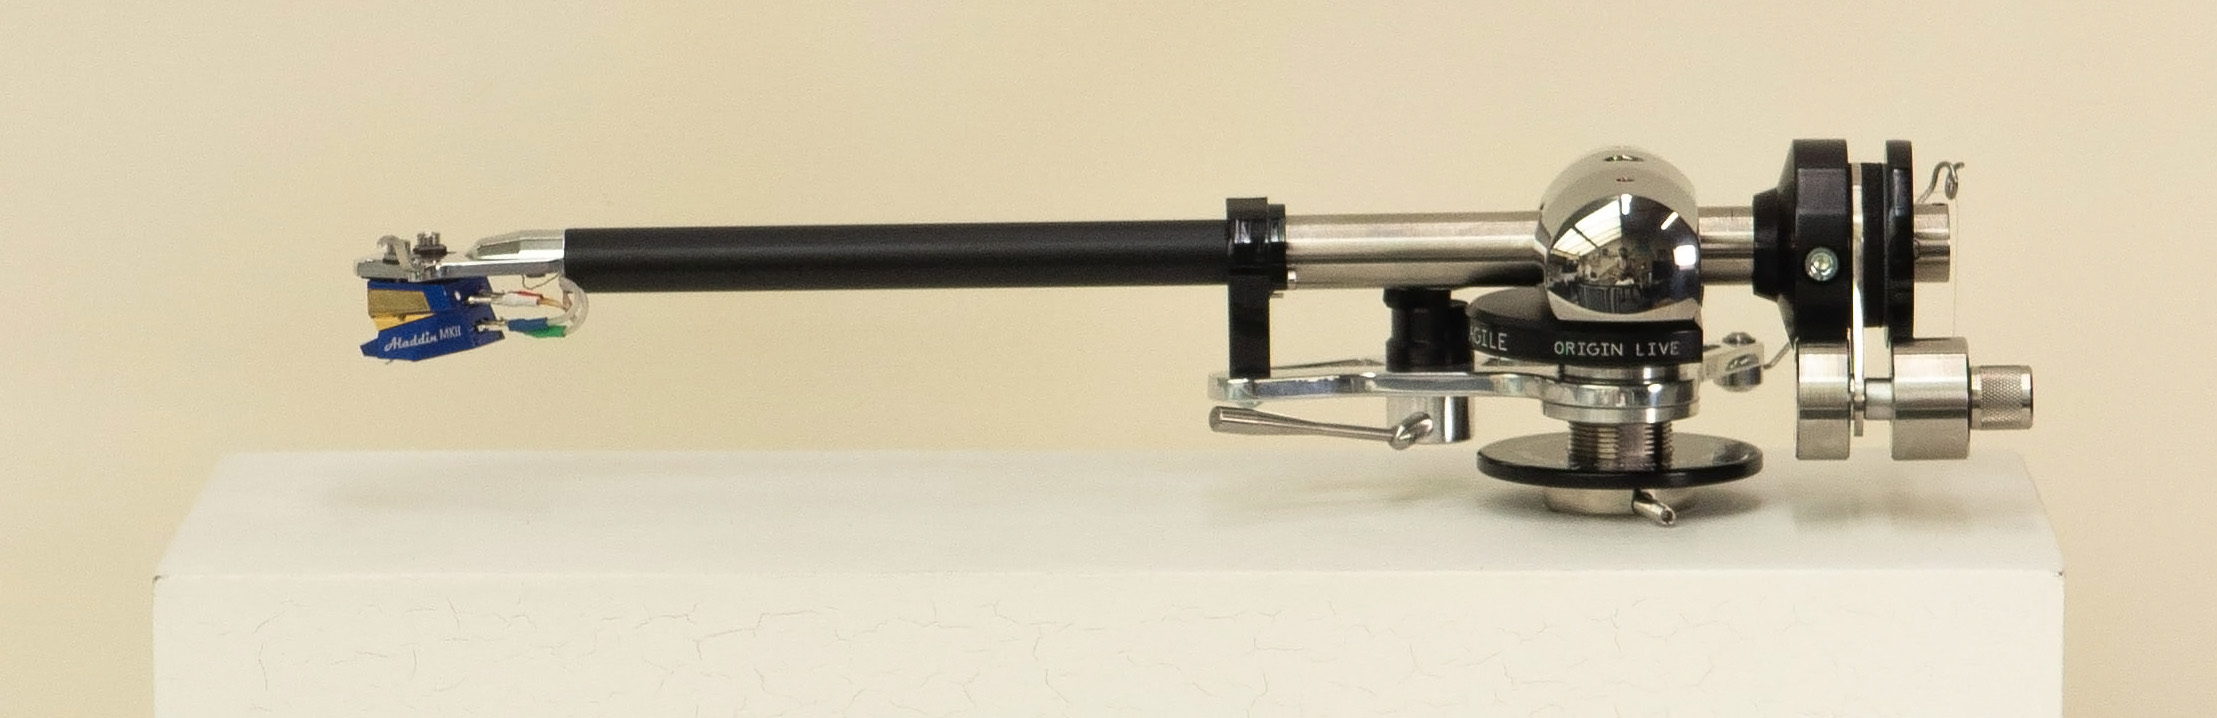 origin live agile tonearm for analogue vinyl audio playback, high end hifi hi fi at its ultimate sound with mid century mid-century stunning styling